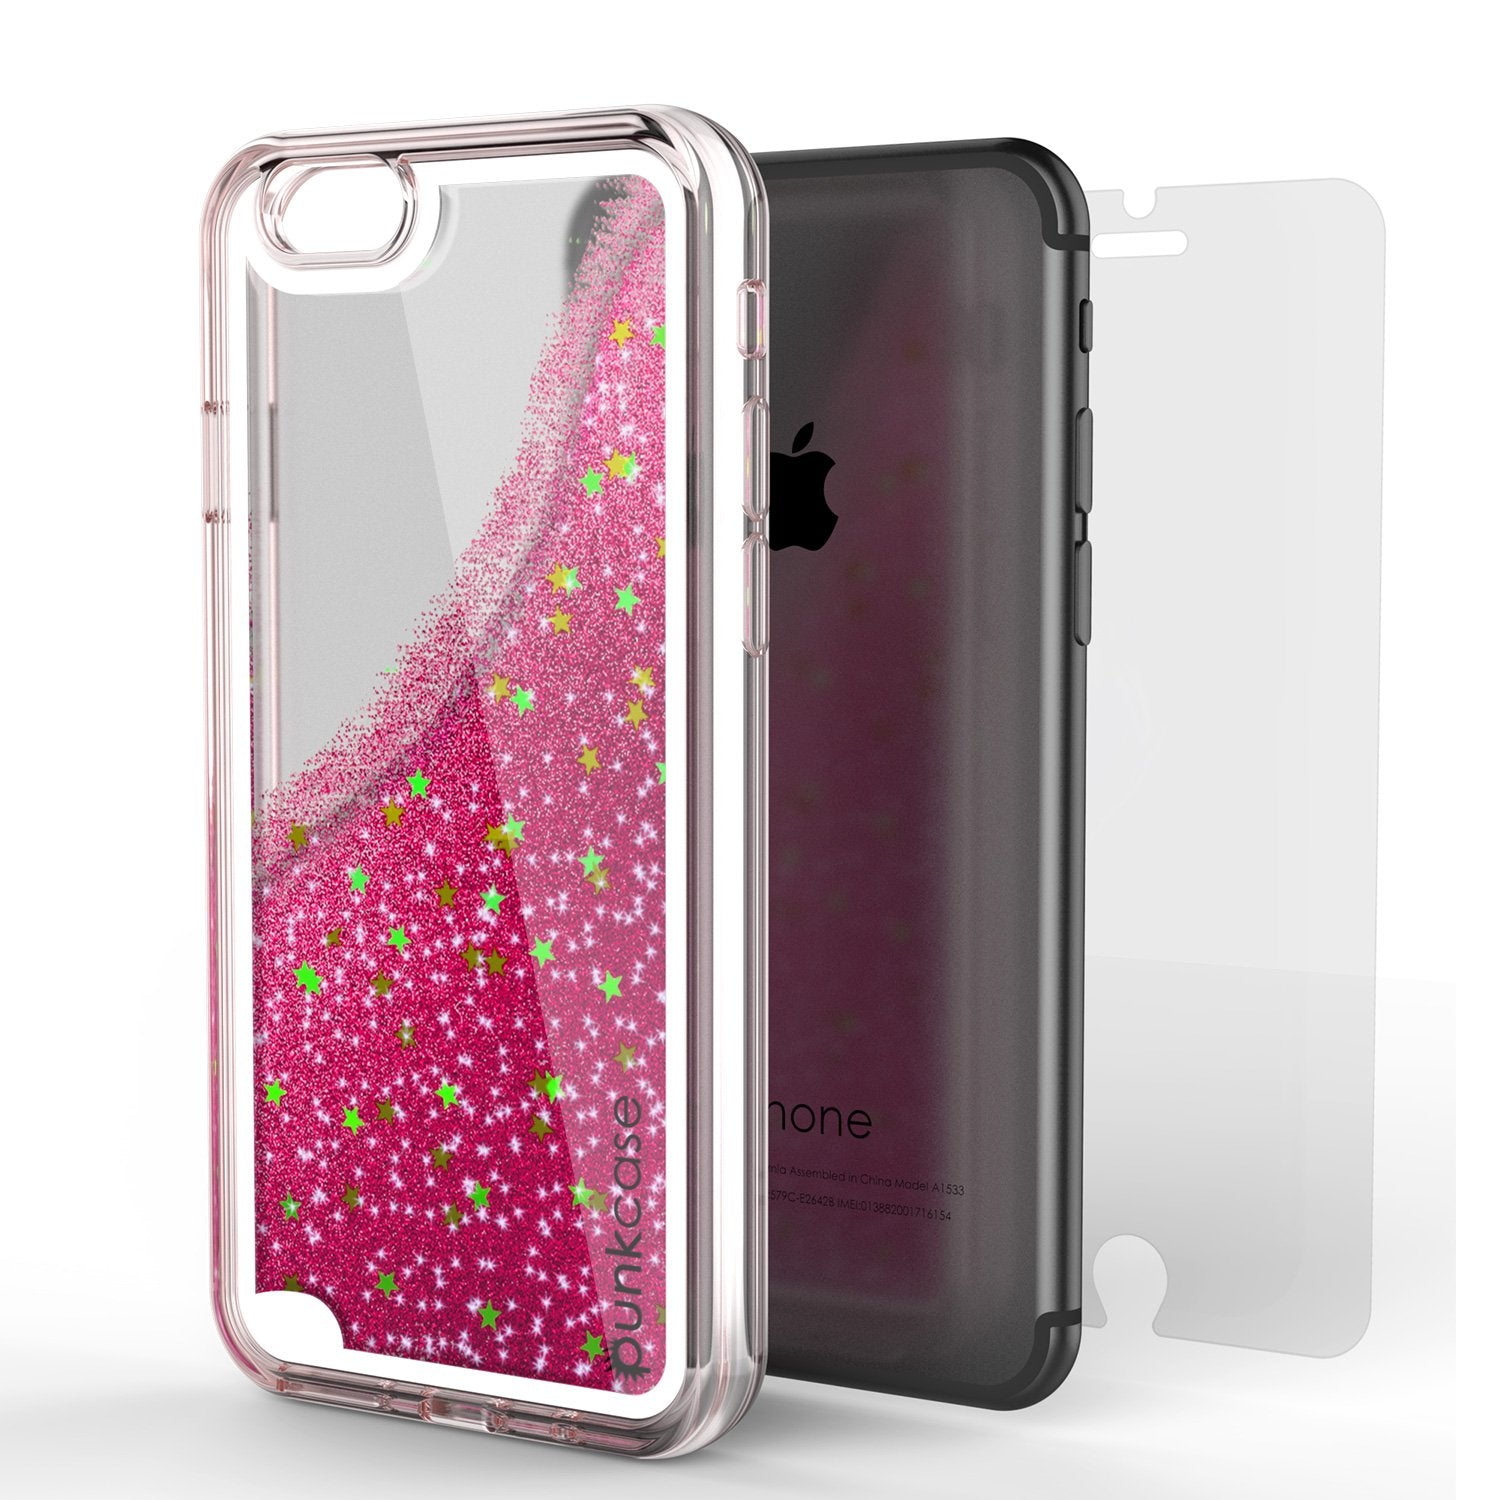 iPhone 7 Case, PunkCase LIQUID Pink Series, Protective Dual Layer Floating Glitter Cover - PunkCase NZ